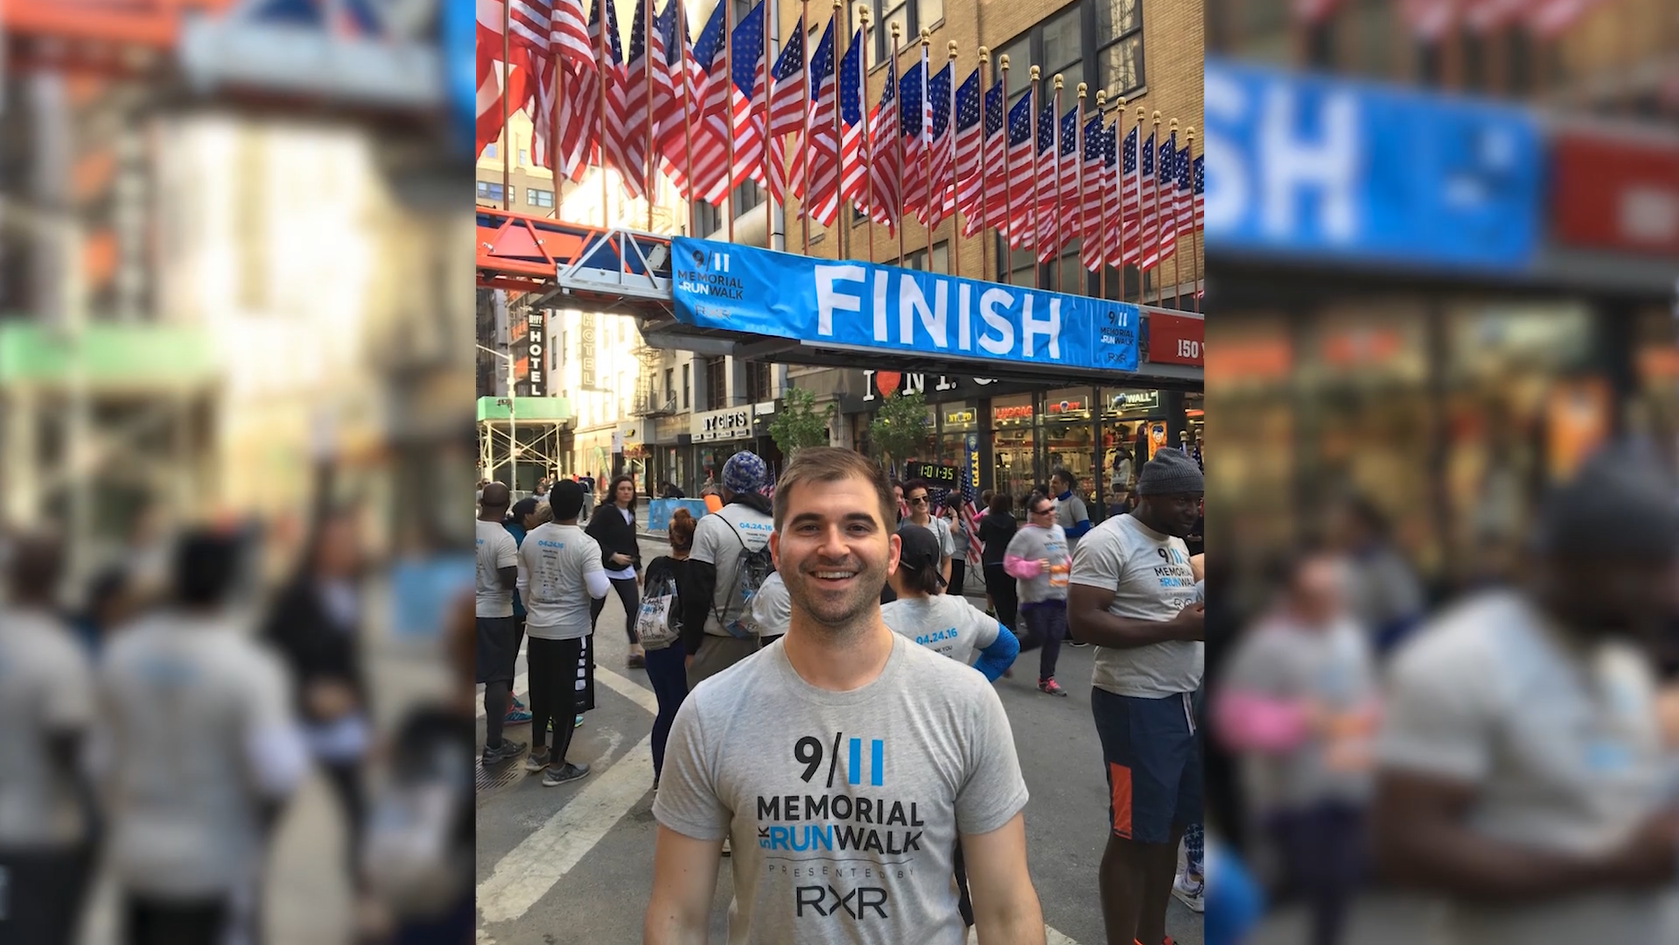 Alex Zablocki, a Museum member and 9/11 Memorial Run/Walk participant, smiles at the finish line in 2016. Other participants cross the finish line behind him. Dozens of American flags stand above the finish line sign.